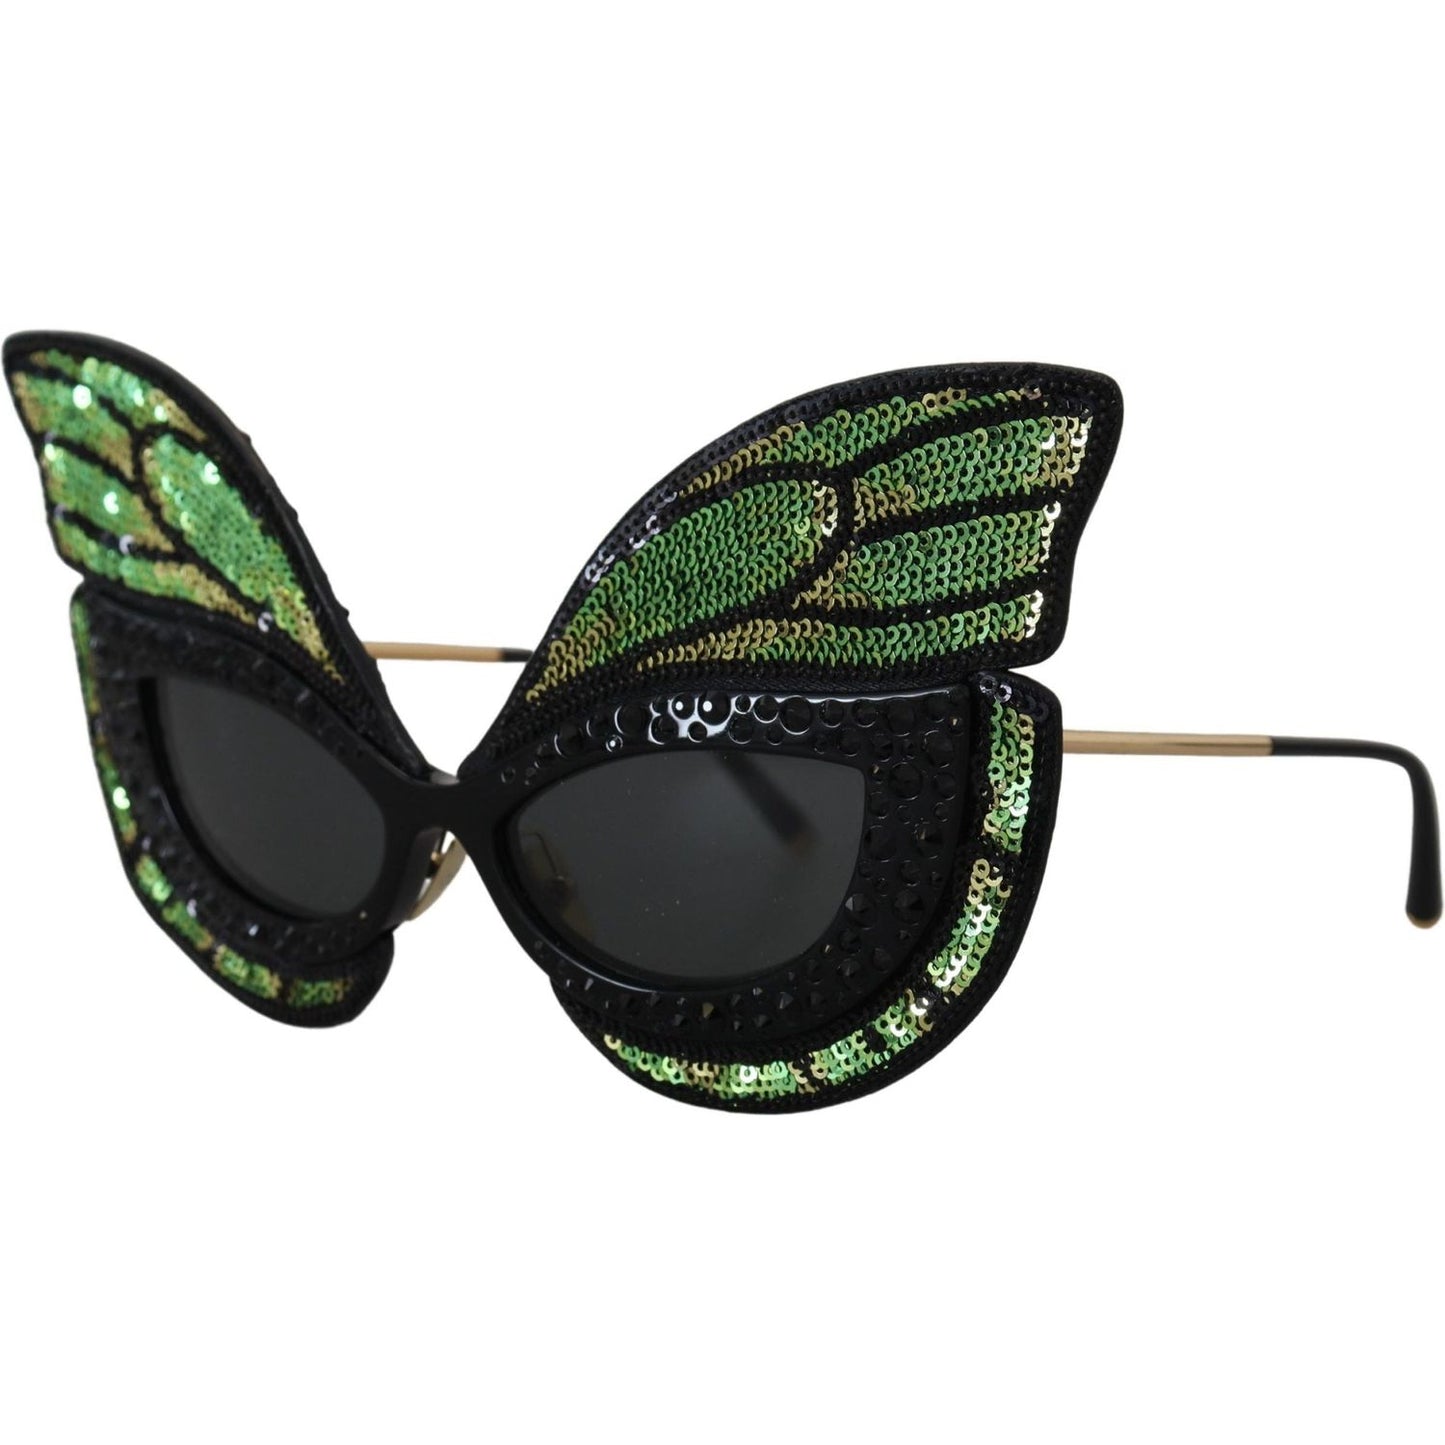 Dolce & Gabbana Exquisite Sequined Butterfly Sunglasses exquisite-sequined-butterfly-sunglasses